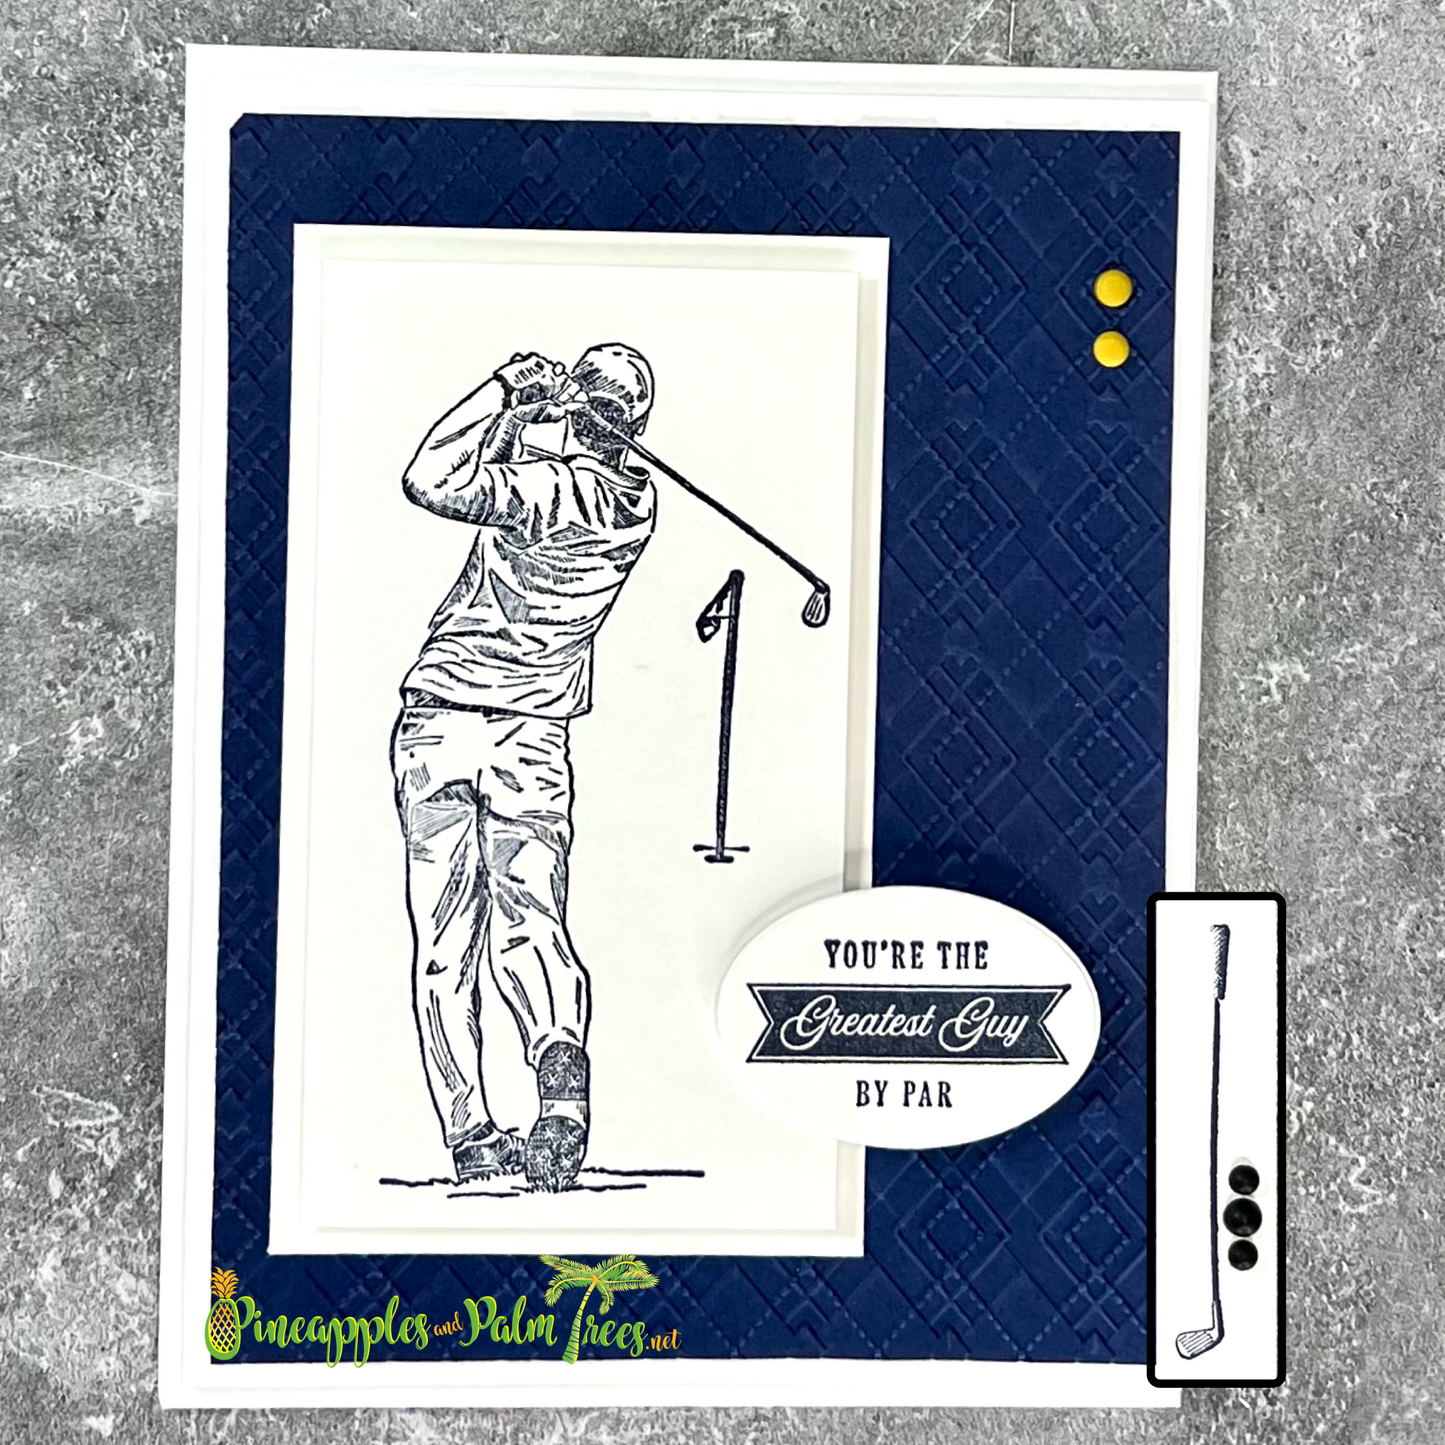 Greeting Card: You're the Greatest Guy By Par - golf